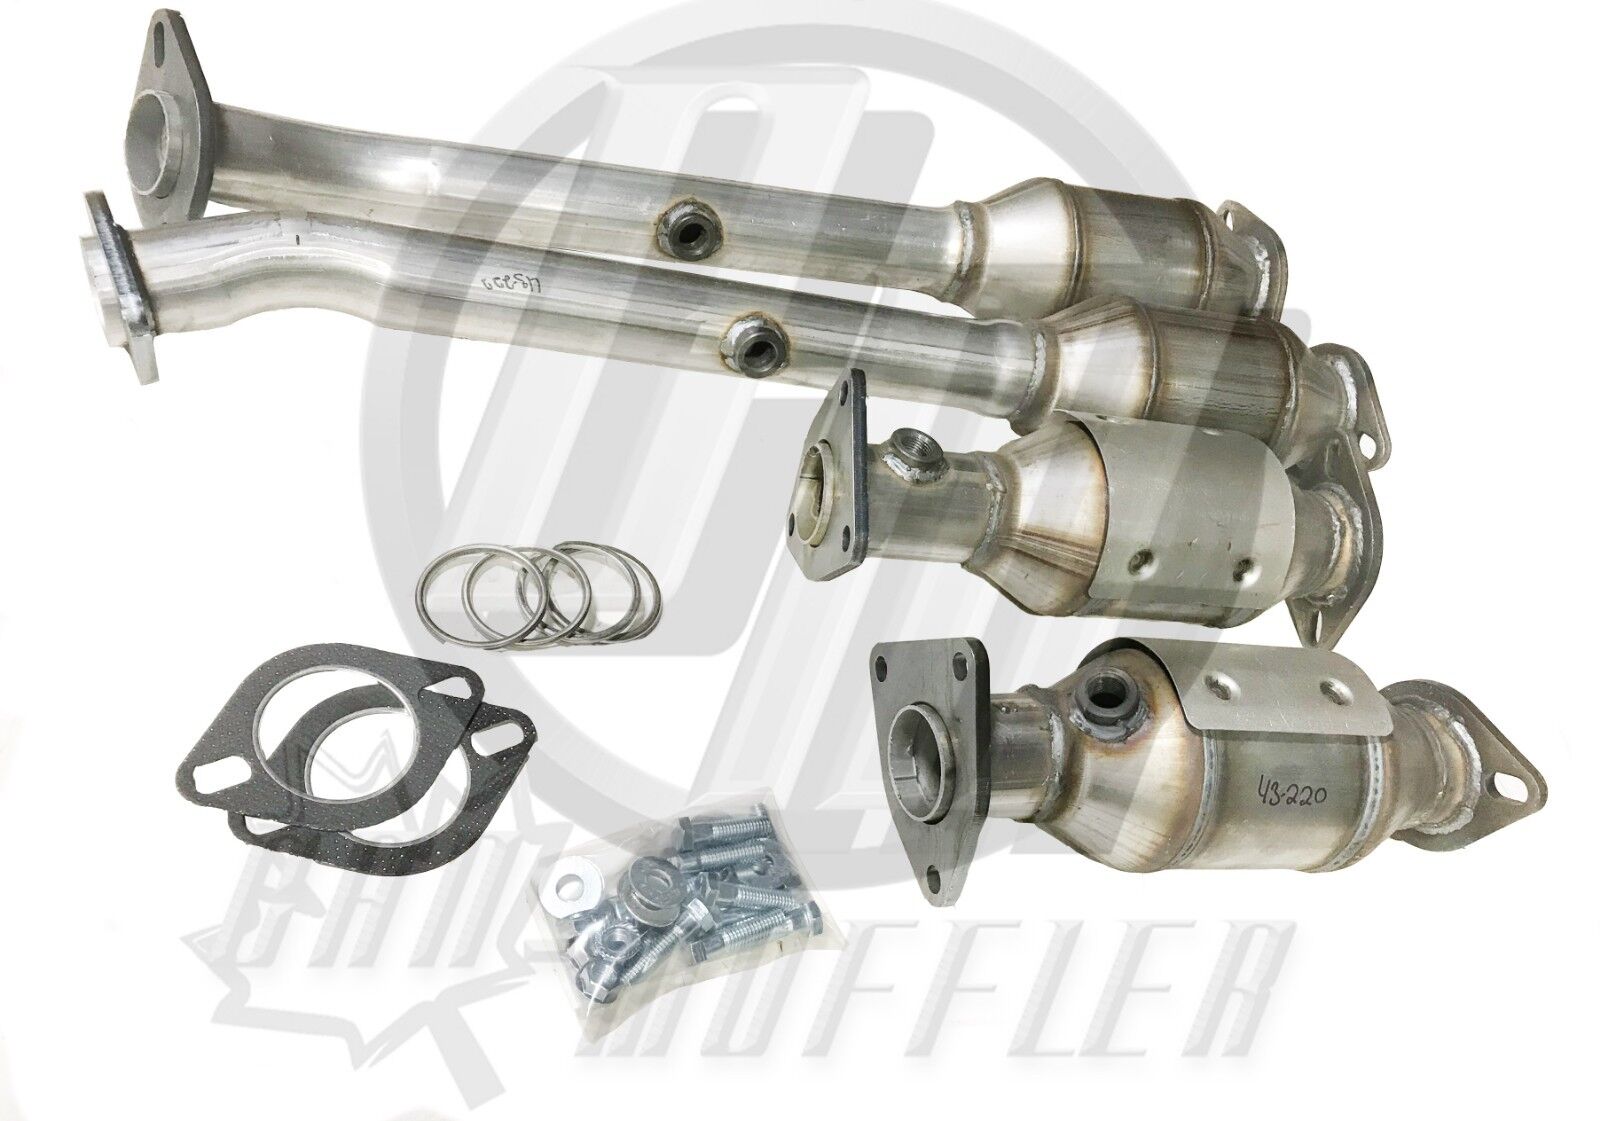 Aftermarket Pathfinder 4.0L ALL FOUR Catalytic Converters 2005-2012 OBDII